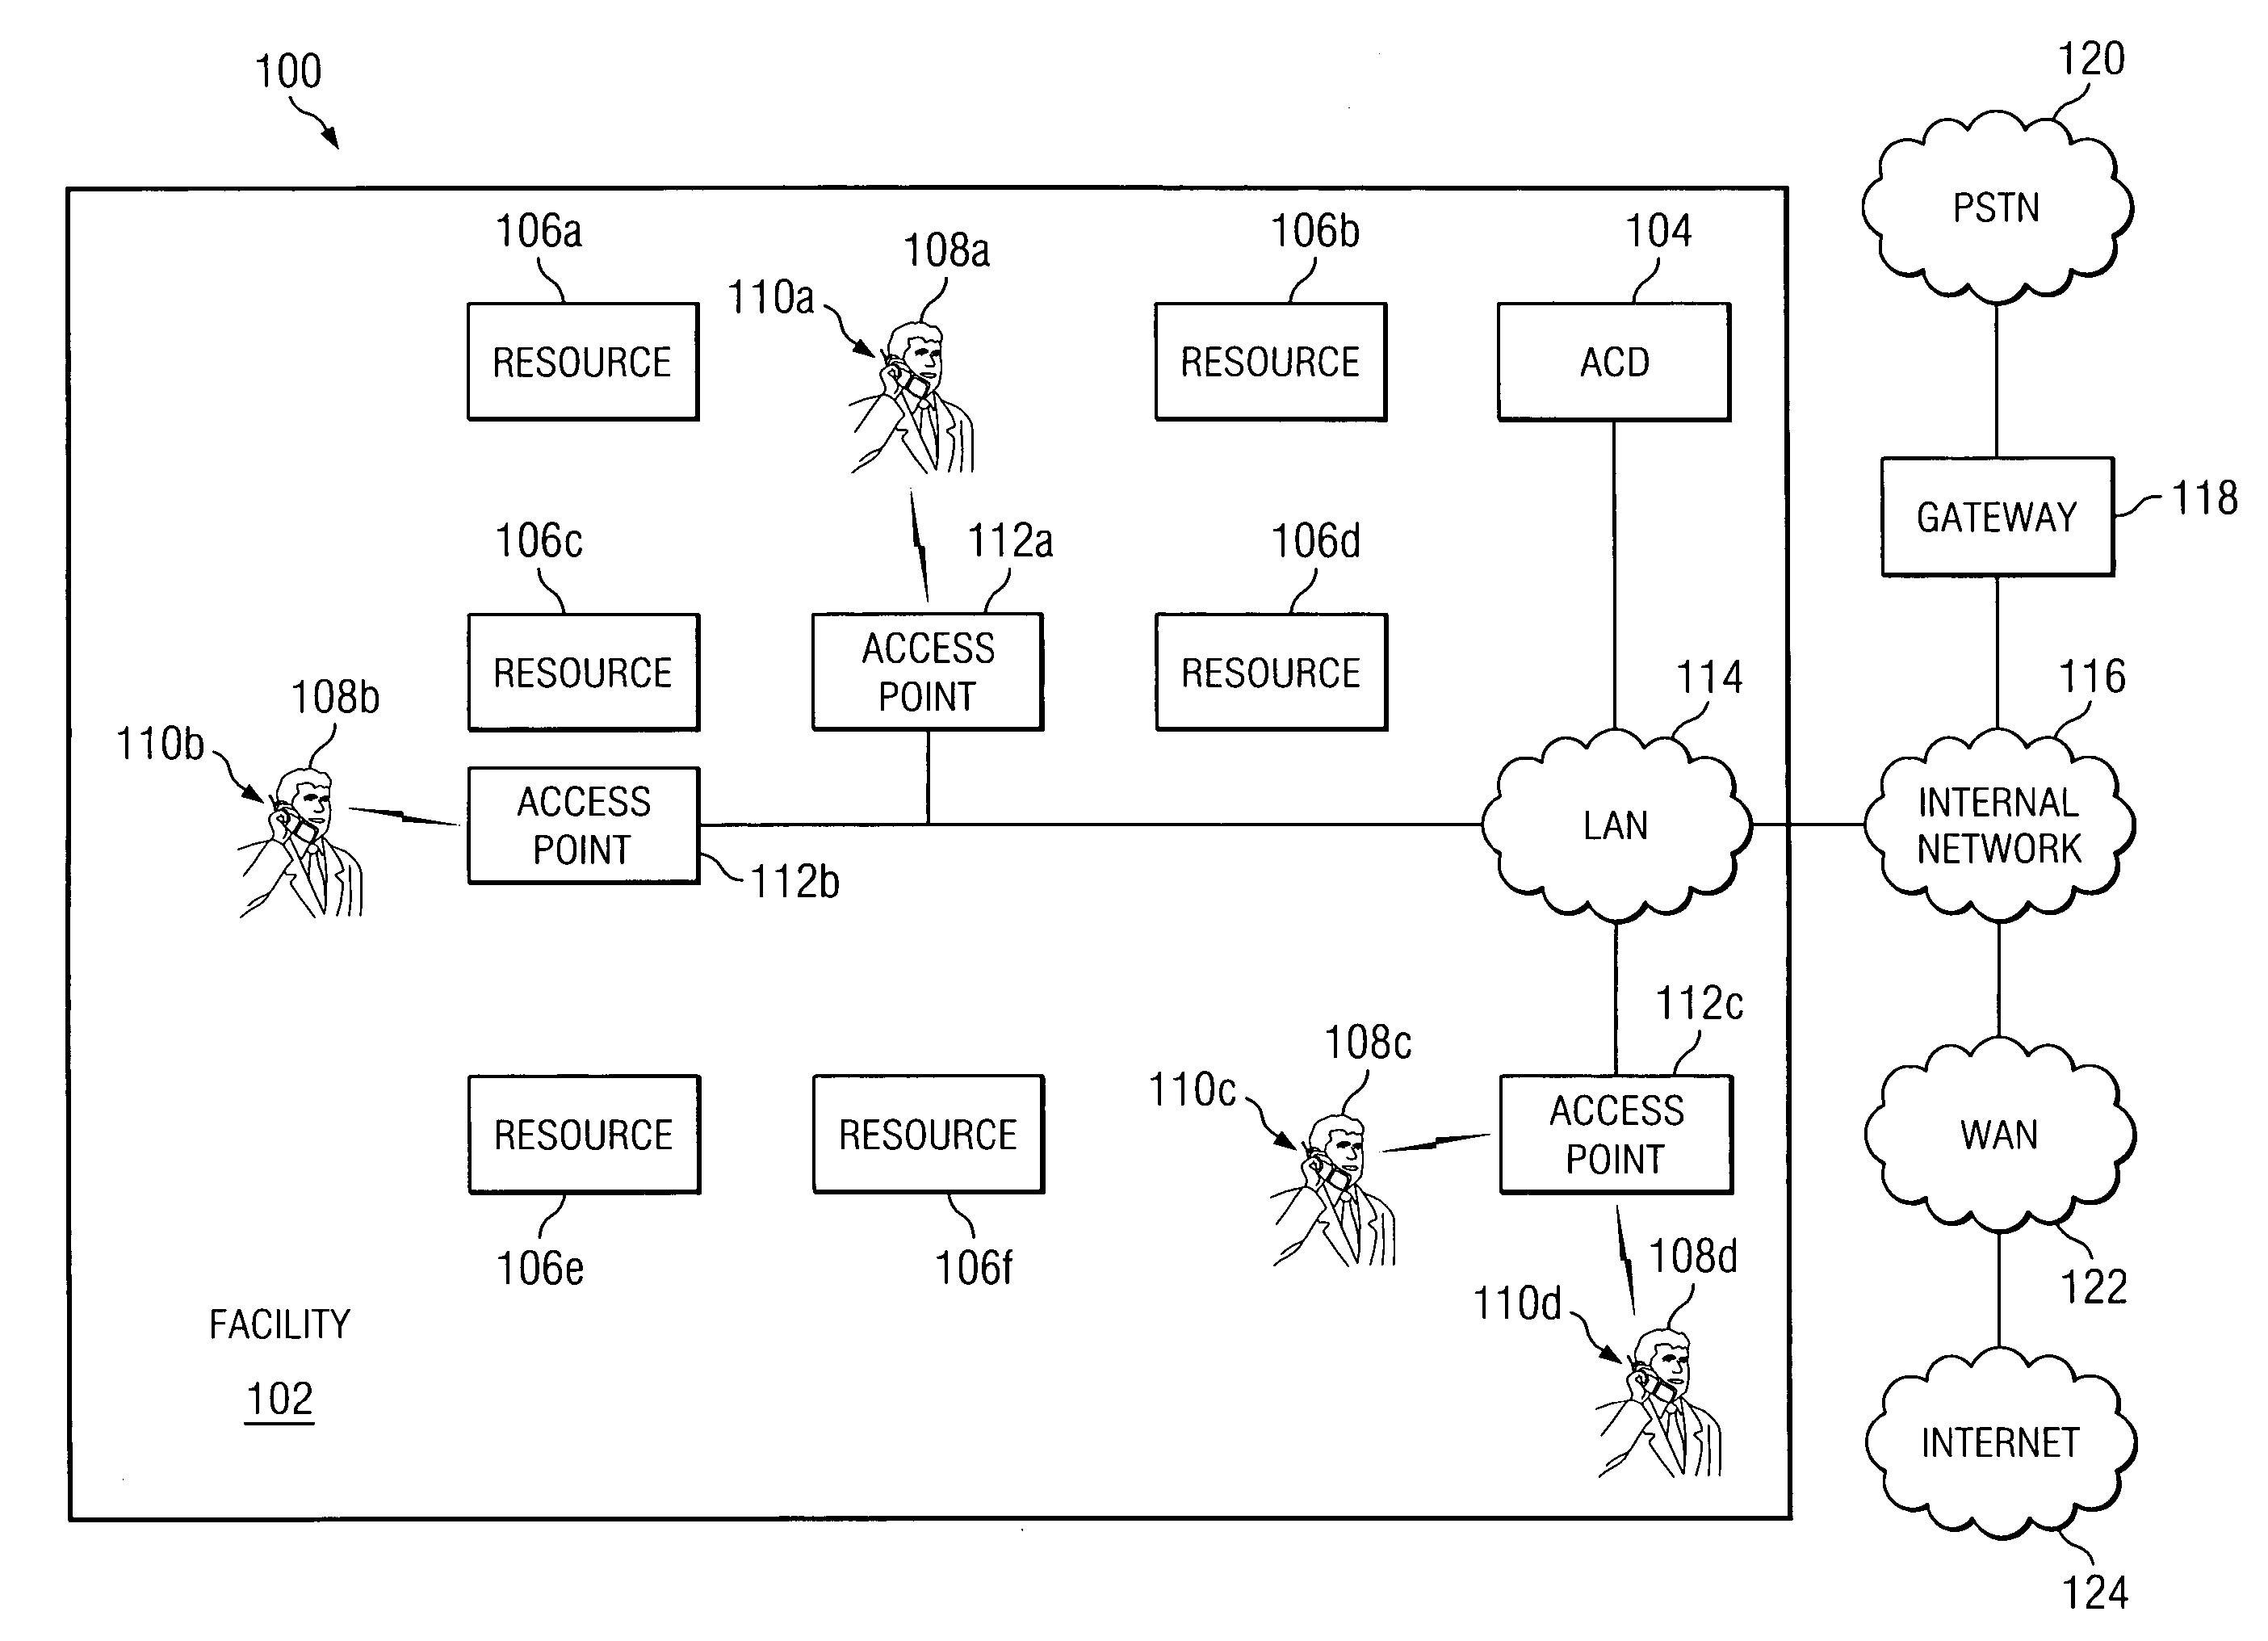 Method and system for automatic call distribution based on location information for call center agents